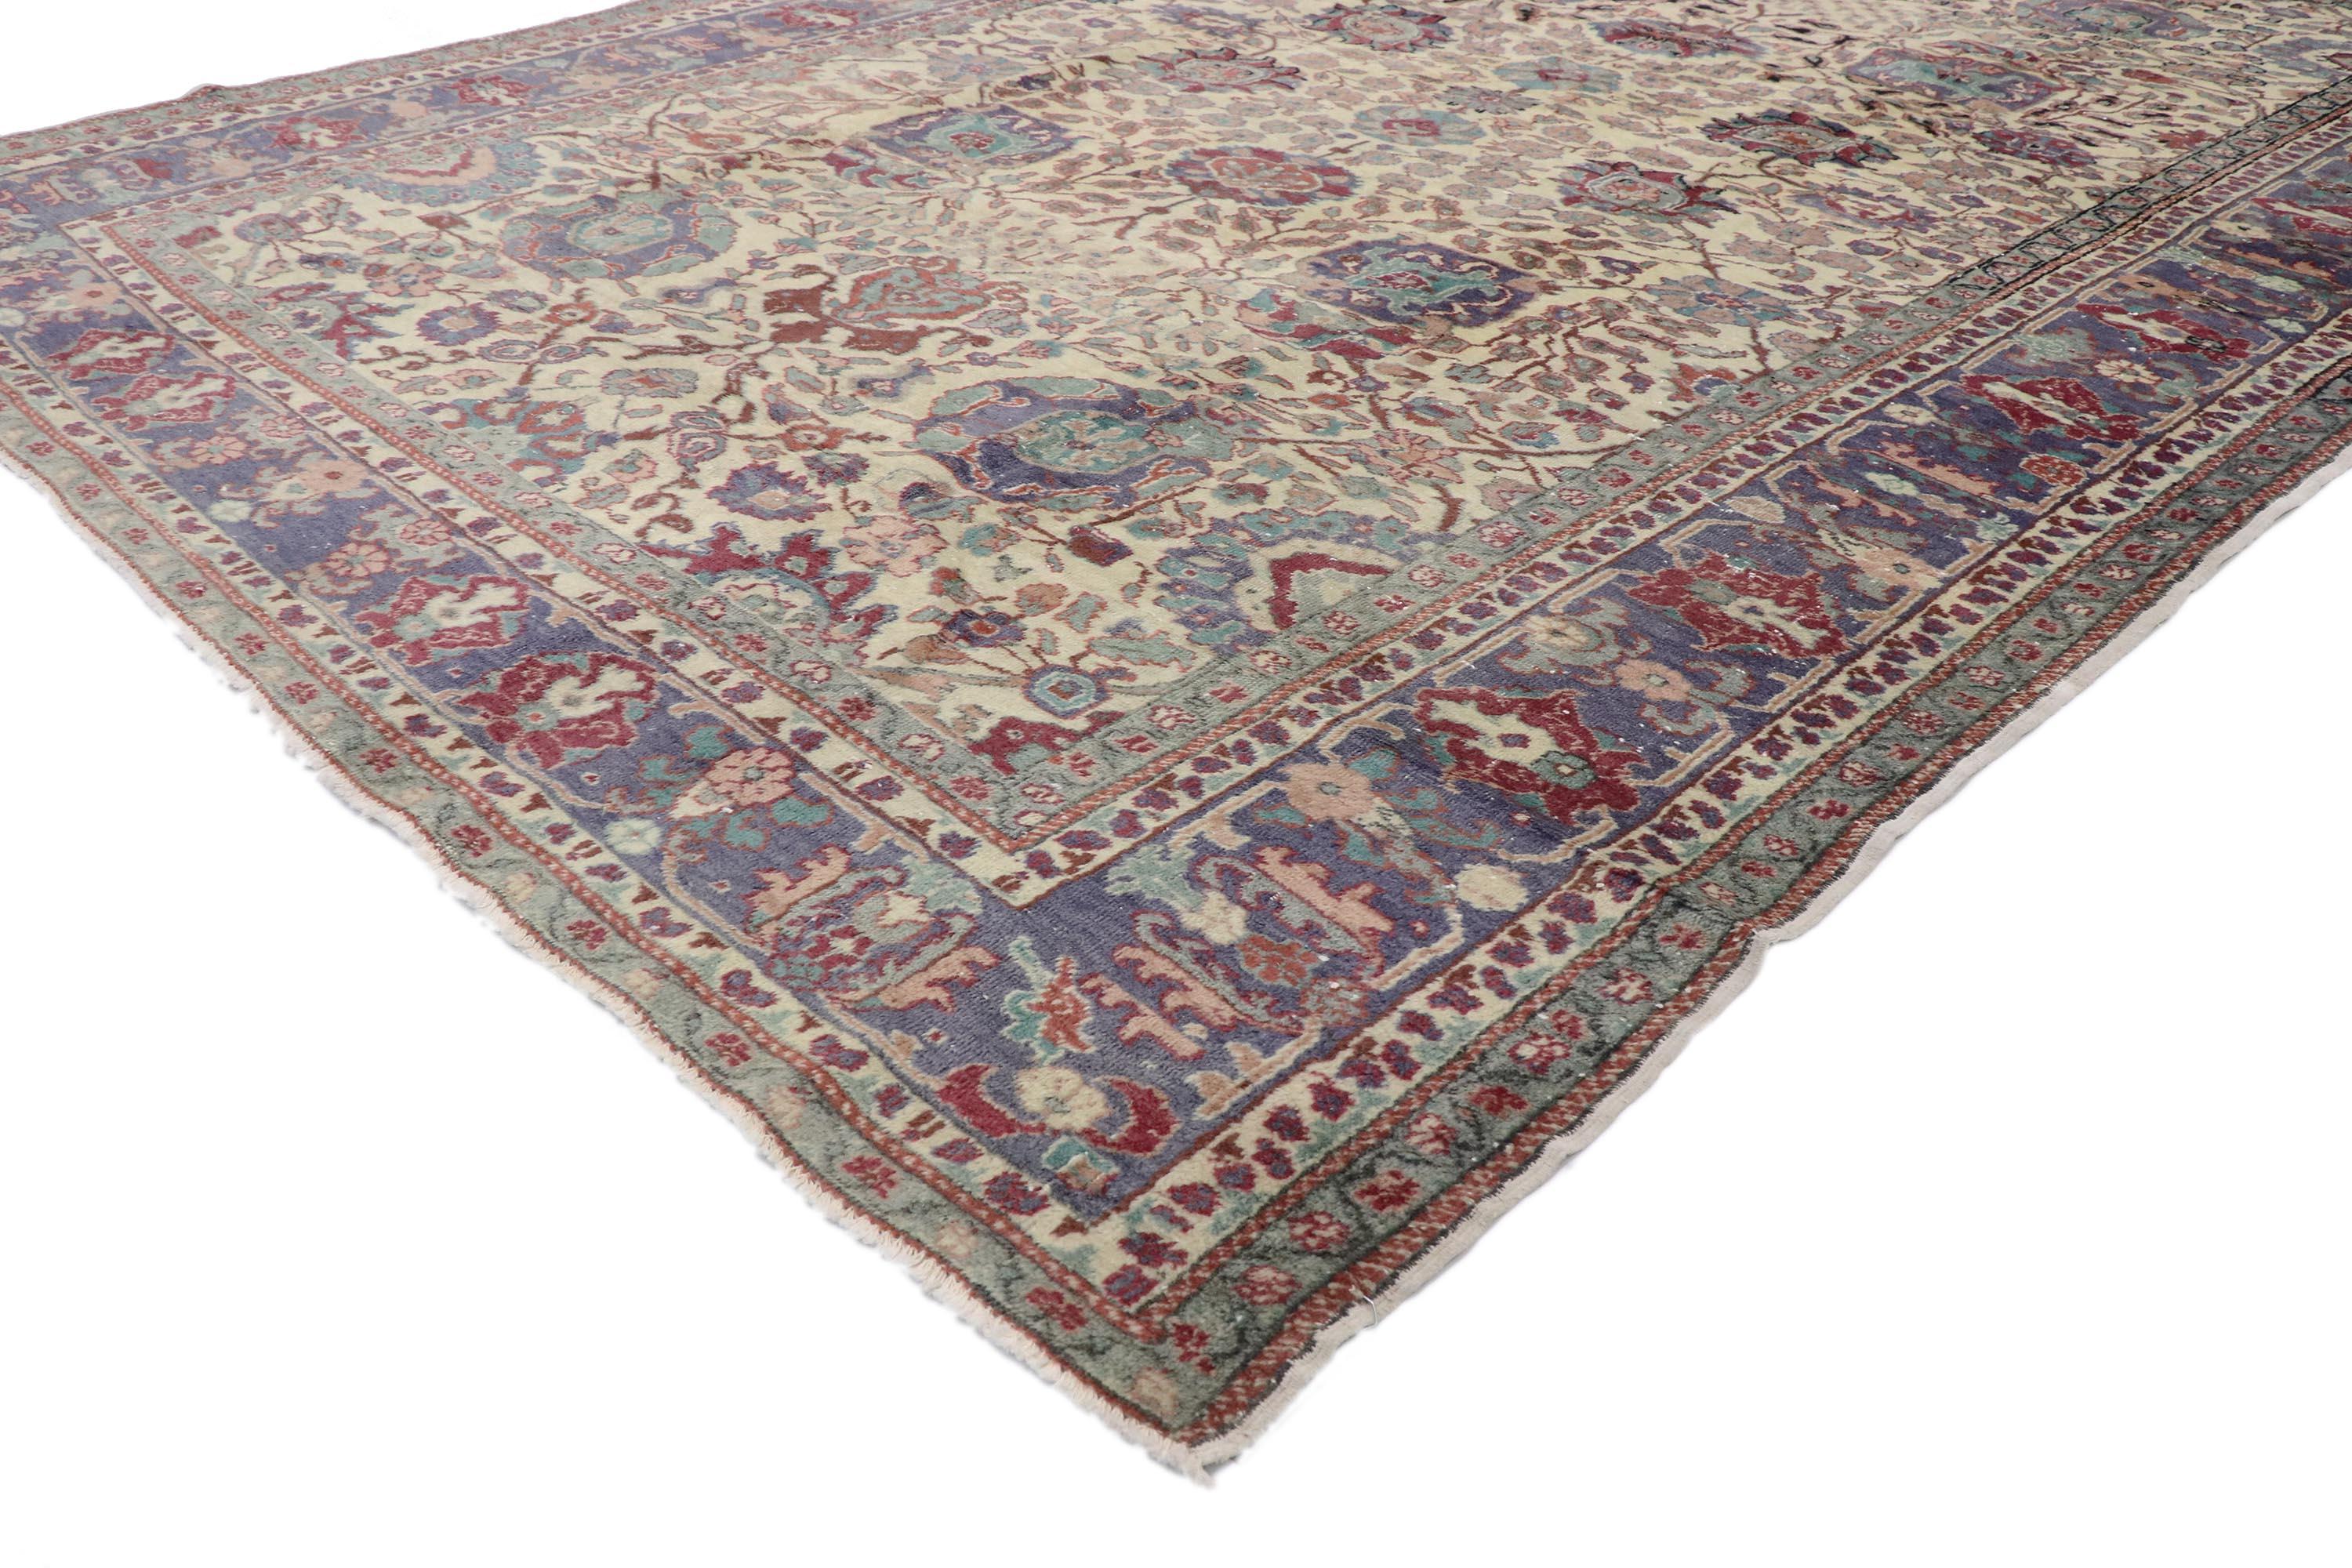 With its timeless style, incredible detail and texture, this hand knotted wool vintage Turkish Oushak rug is a captivating vision of woven beauty. The eye-catching botanical design and sophisticated colorway woven into this piece work together